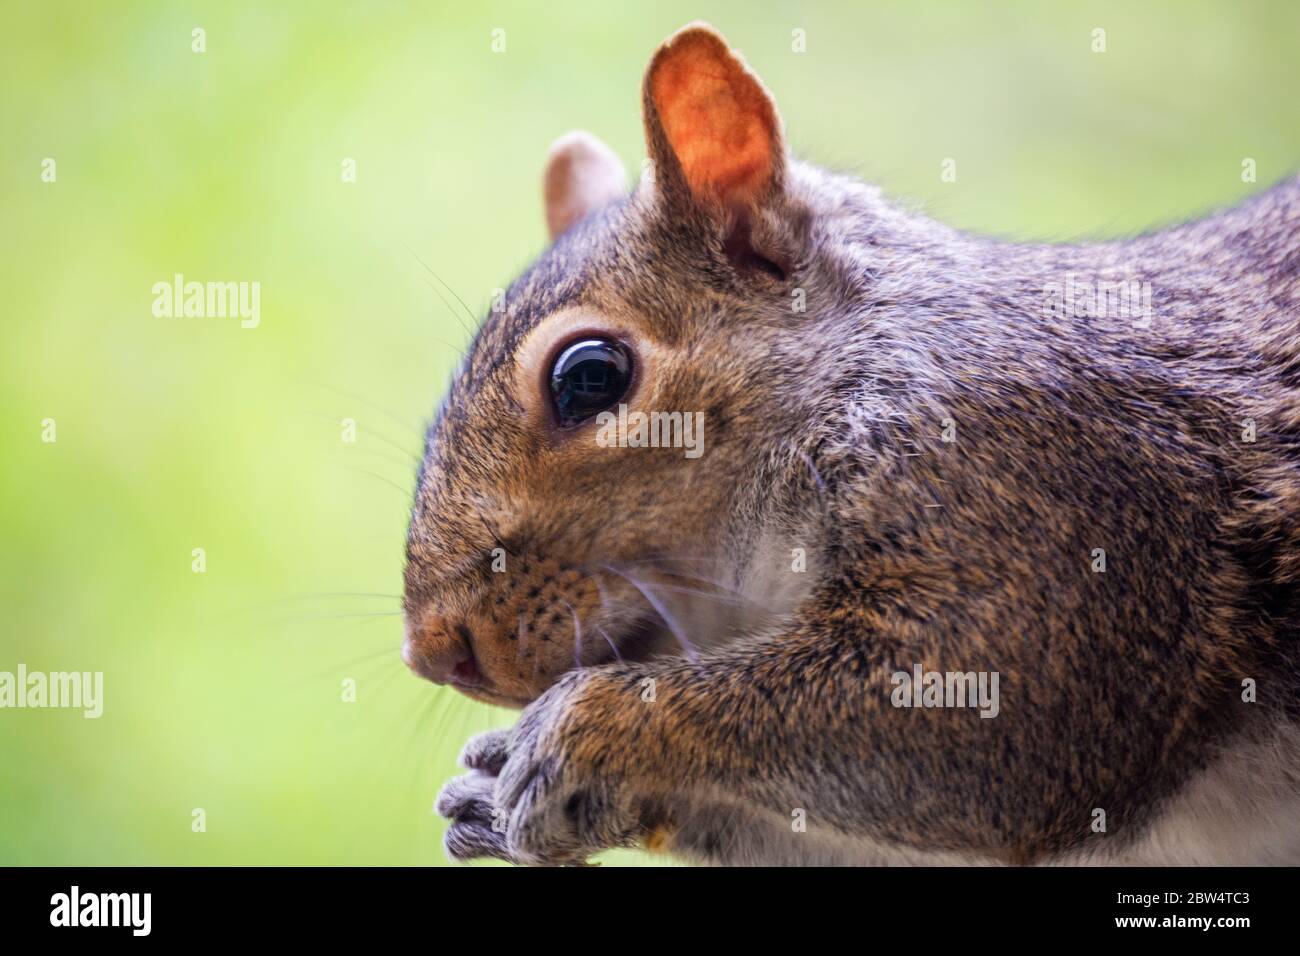 A young gray squirrel perches on a shepherds hook while attempting to reach a bird feeder.  Close up head shot.  Background blurred. Stock Photo